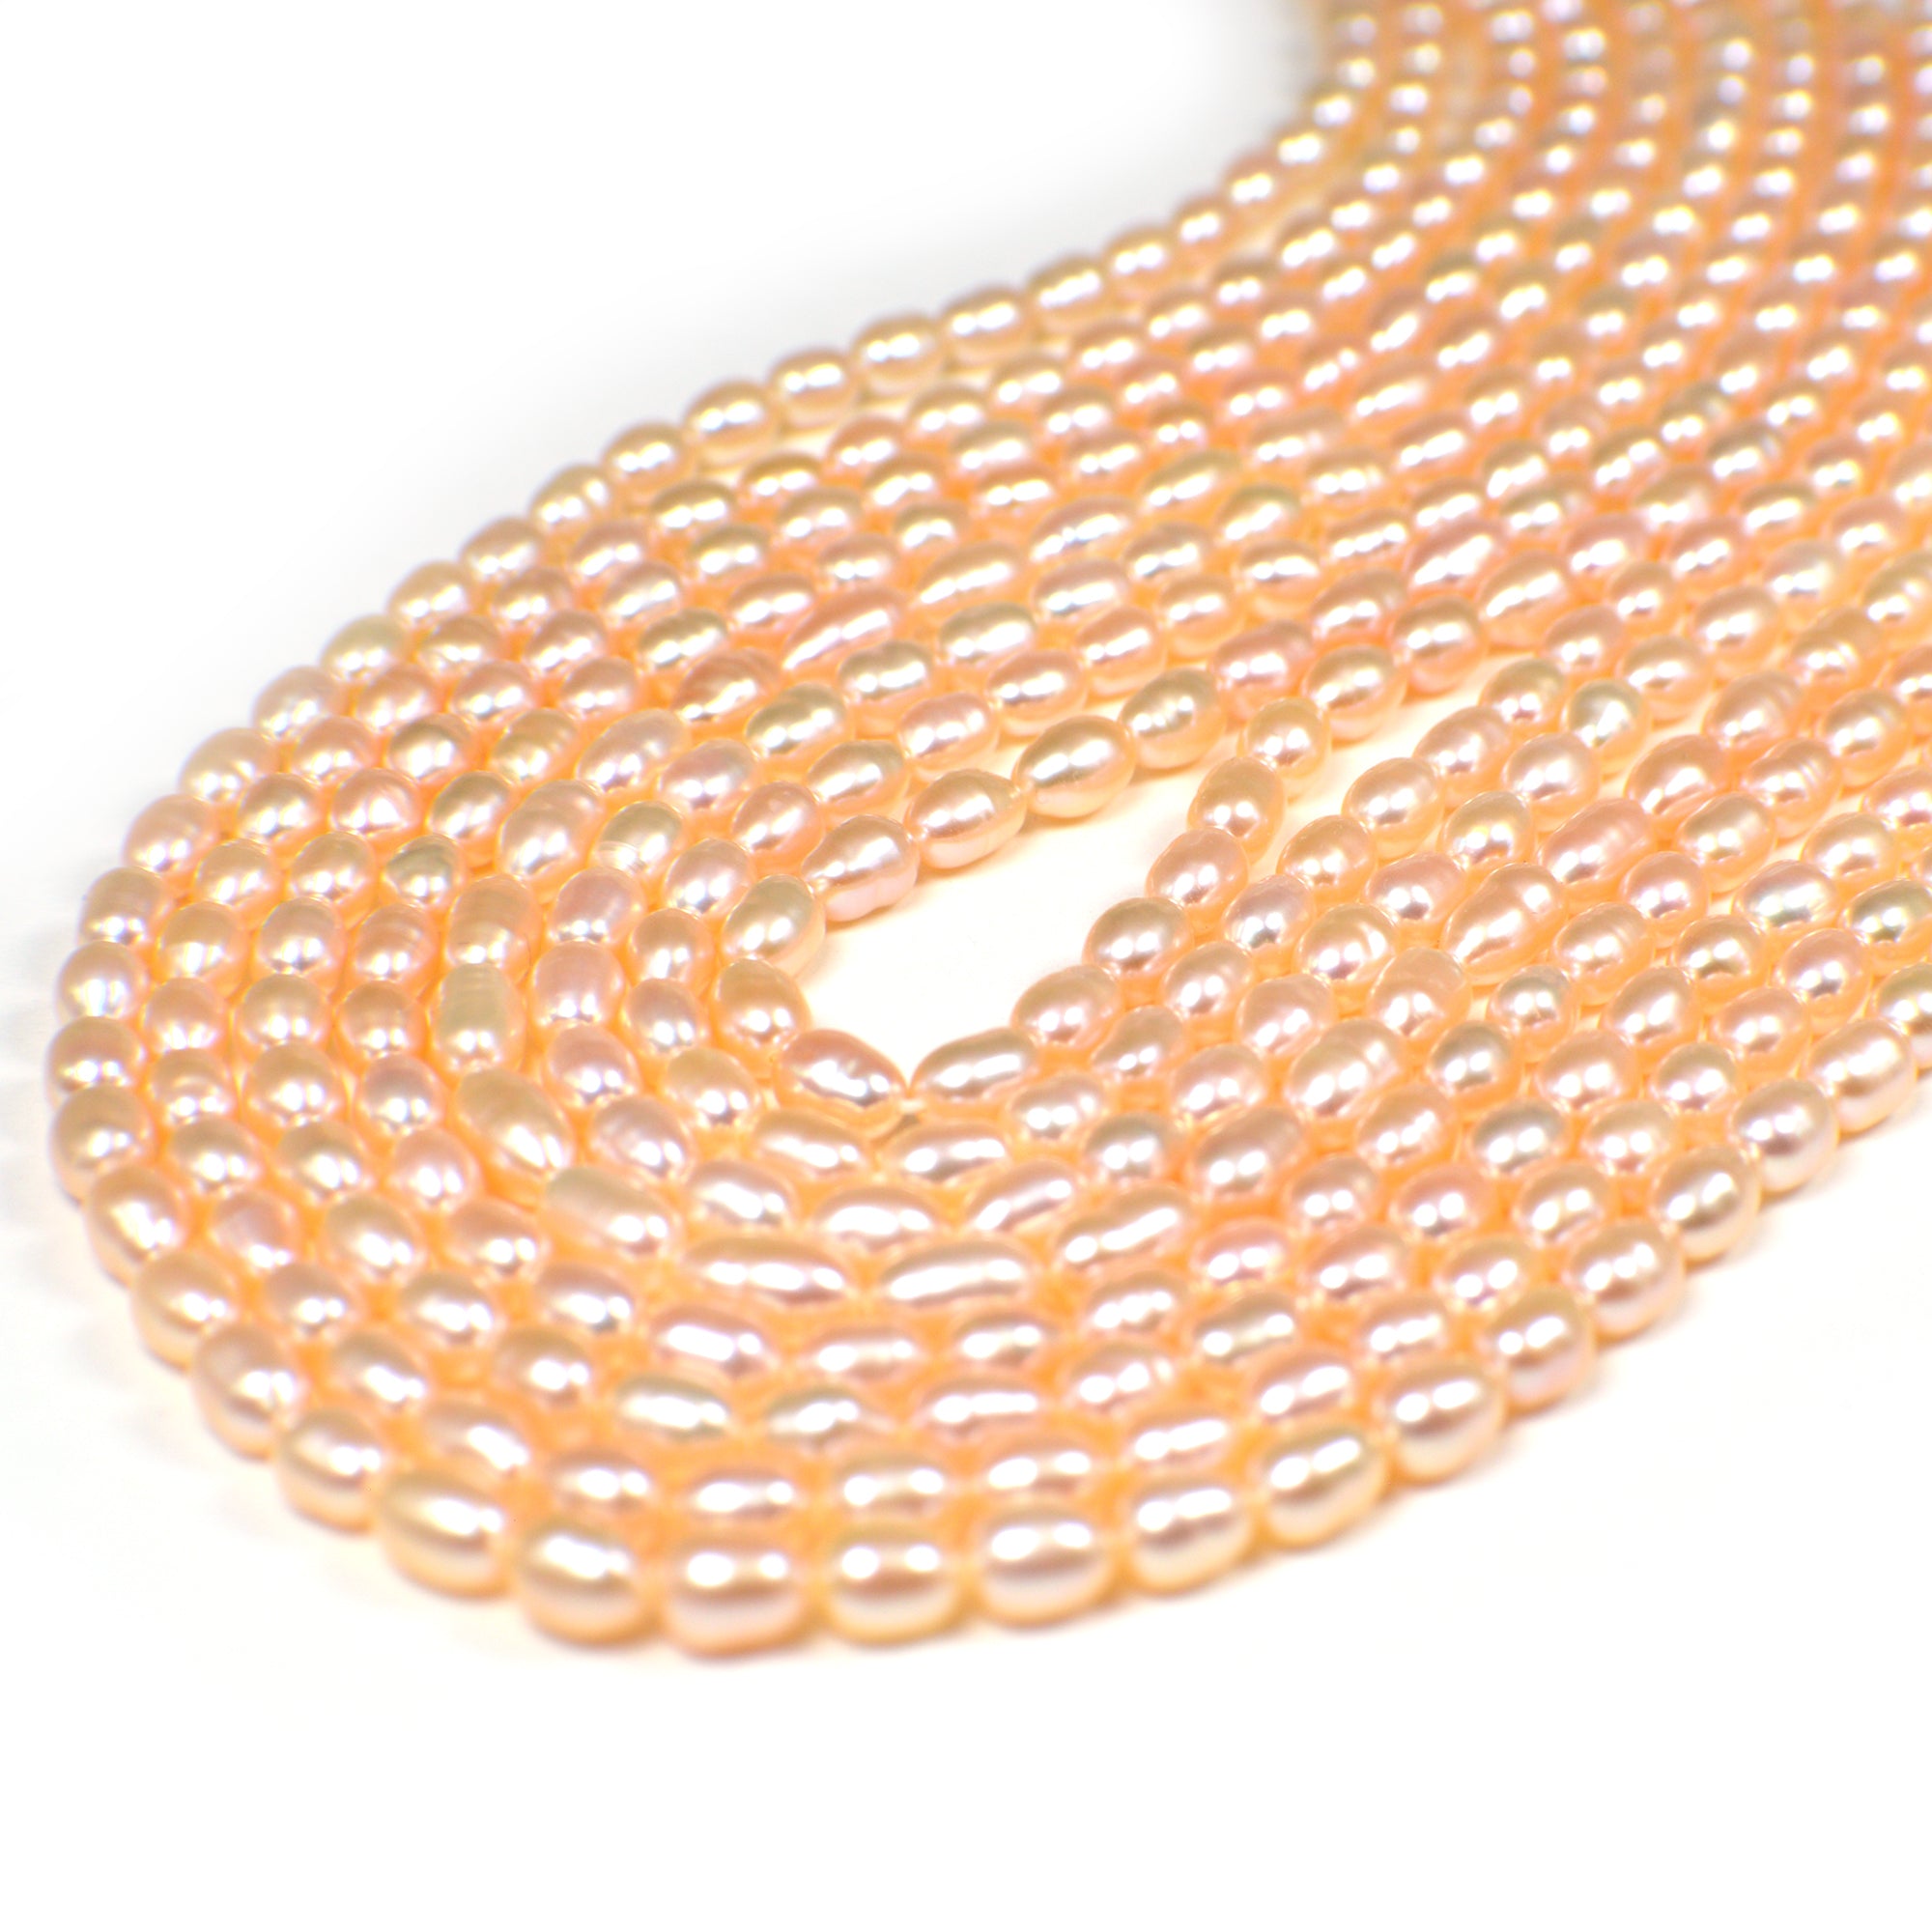 6.5x5.5 - 7.5x5.5 MM Light Peach Rice / Oval Freshwater Pearls Beads